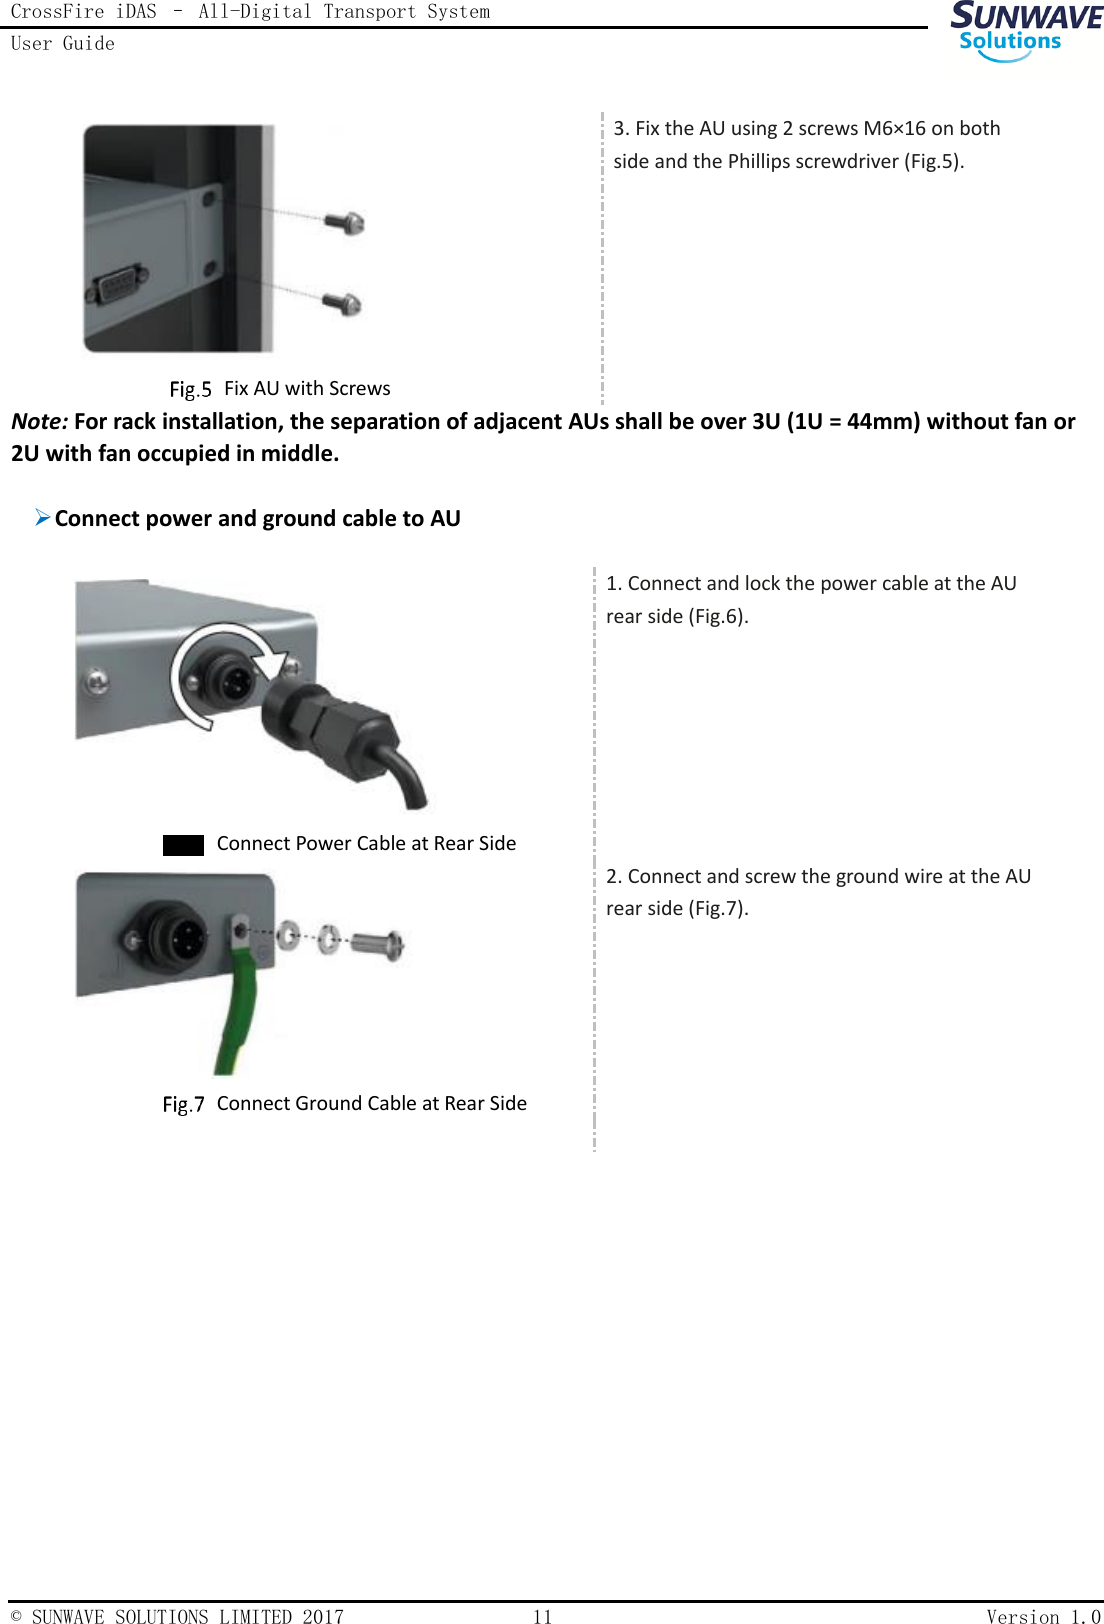 CrossFire iDAS – All-Digital Transport System User Guide    © SUNWAVE SOLUTIONS LIMITED 2017  11  Version 1.0      Fix AU with Screws 3. Fix the AU using 2 screws M6×16 on both side and the Phillips screwdriver (Fig.5). Note: For rack installation, the separation of adjacent AUs shall be over 3U (1U = 44mm) without fan or 2U with fan occupied in middle.   Connect power and ground cable to AU      Connect Power Cable at Rear Side 1. Connect and lock the power cable at the AU rear side (Fig.6).      Connect Ground Cable at Rear Side 2. Connect and screw the ground wire at the AU rear side (Fig.7).      